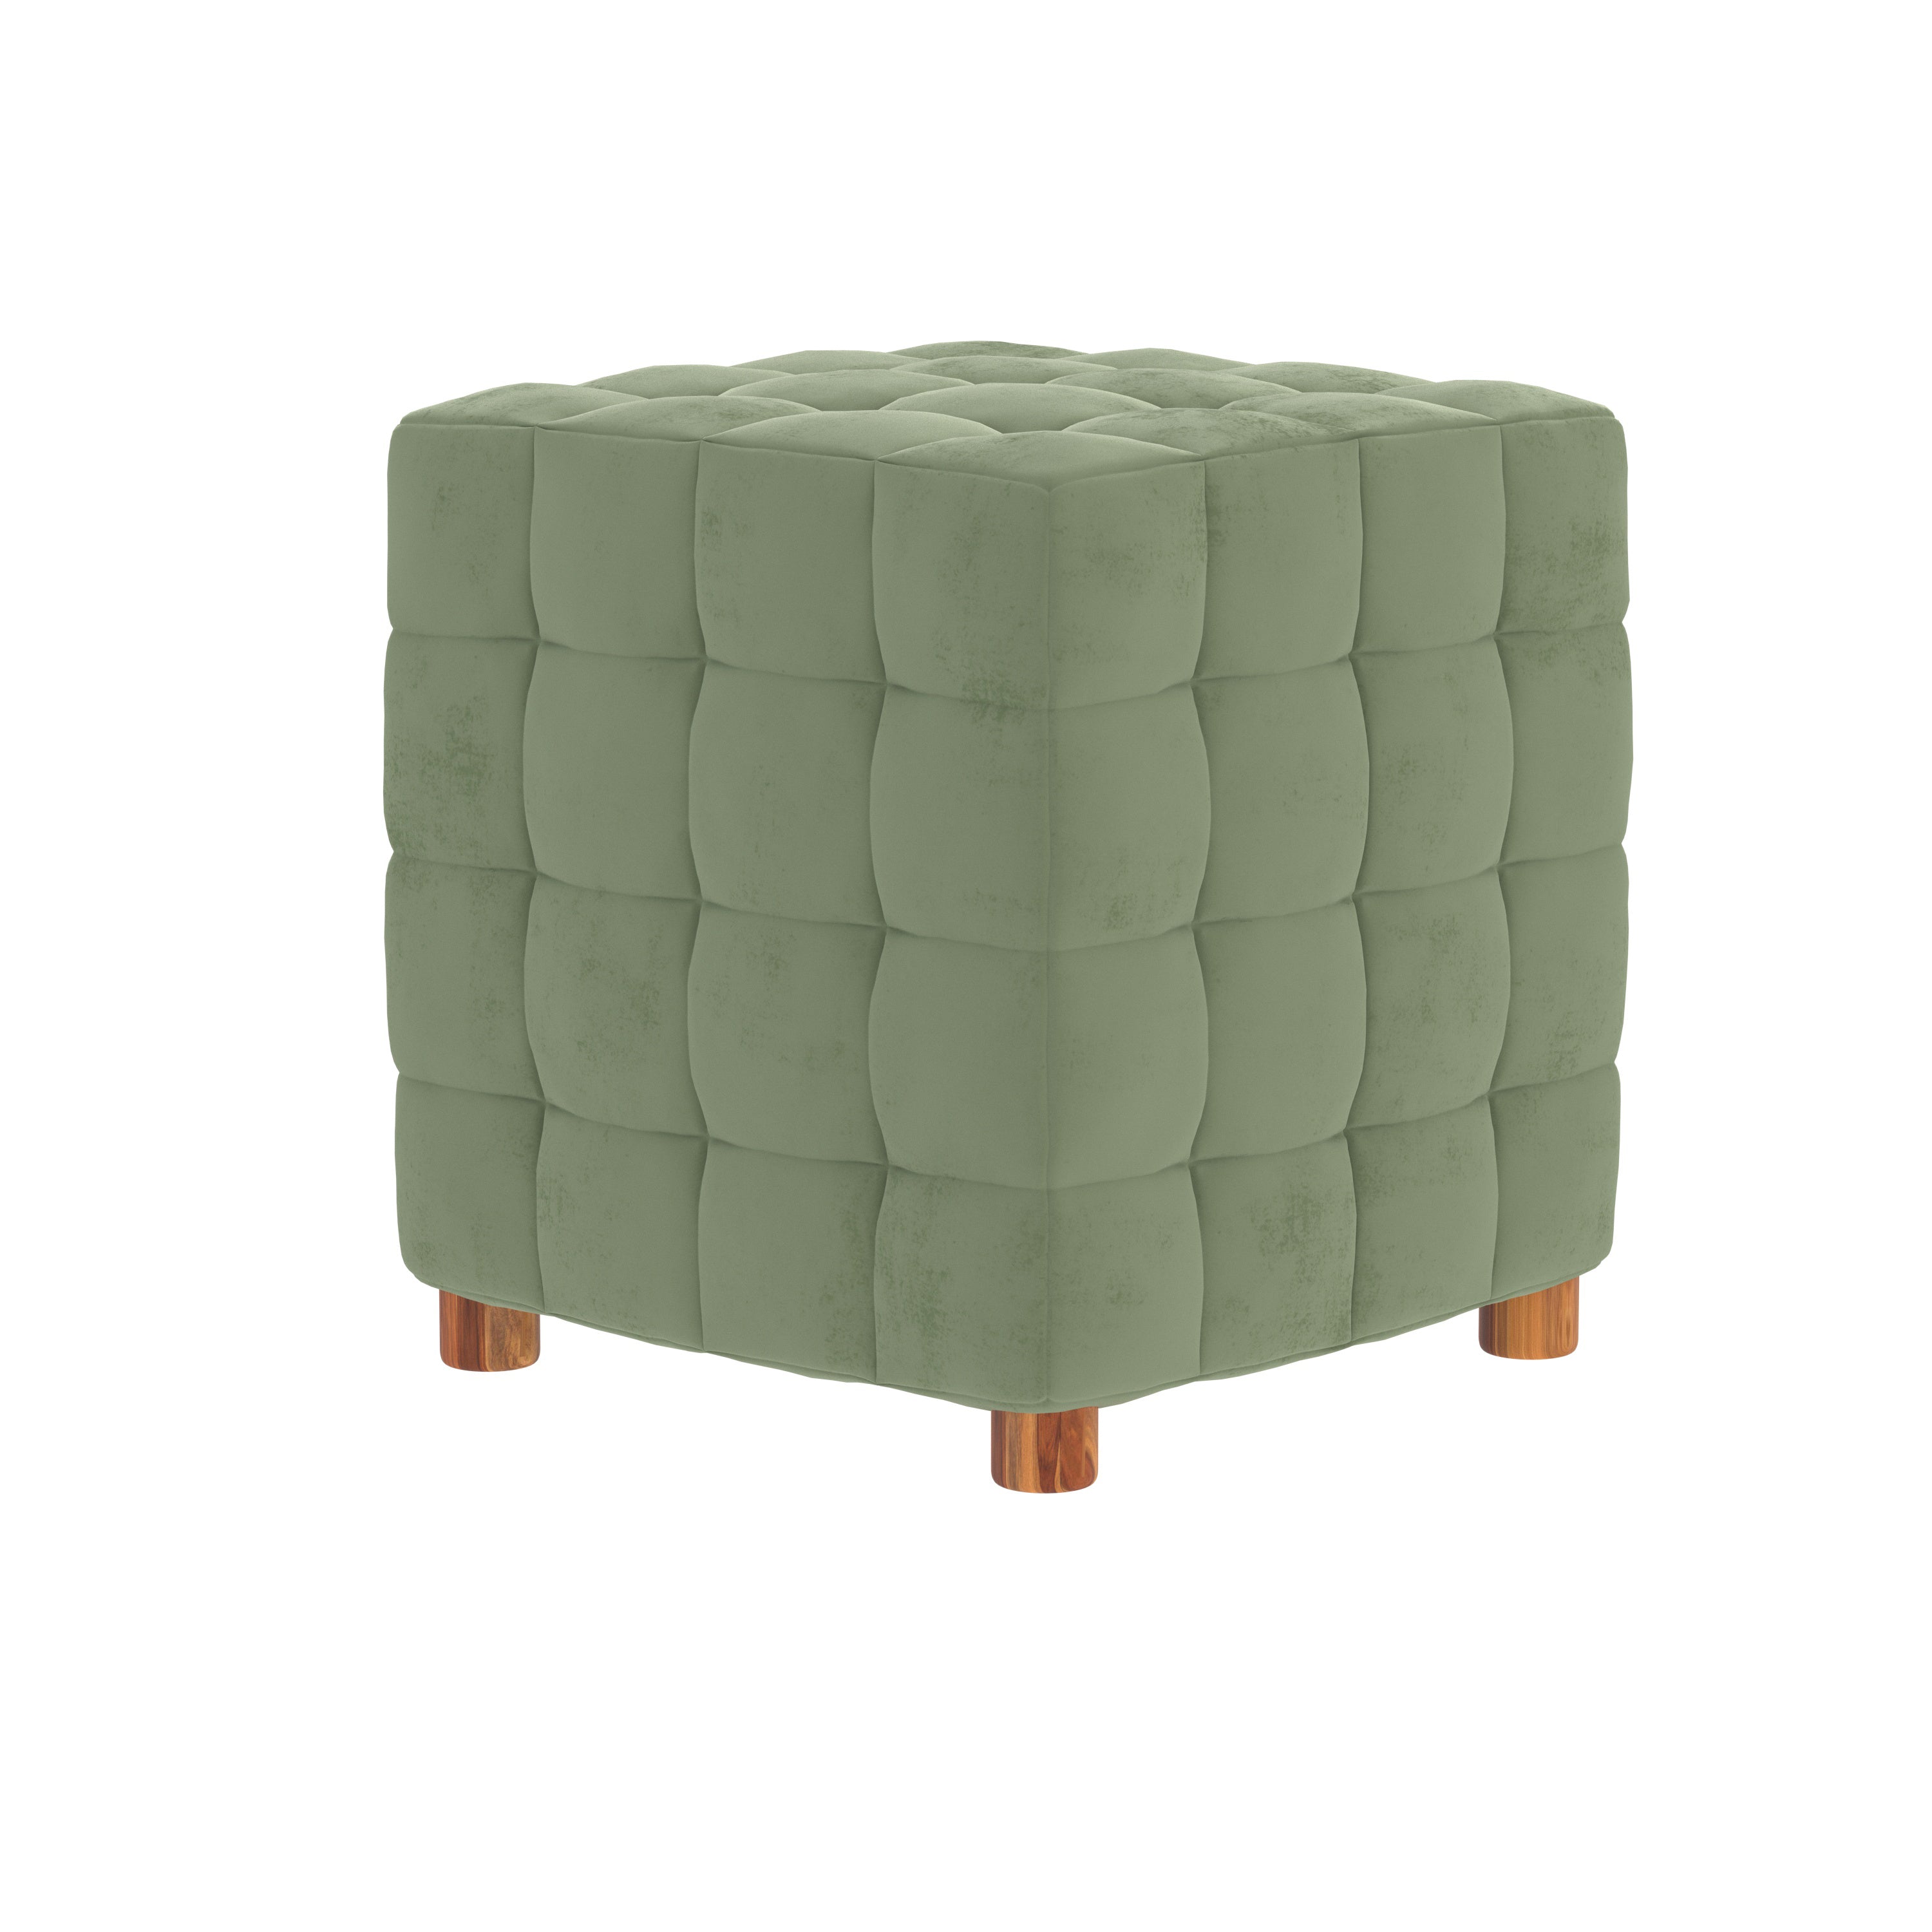 Coco Coilin Green Wooden Smooth Finish Light Seating Stool Pouf